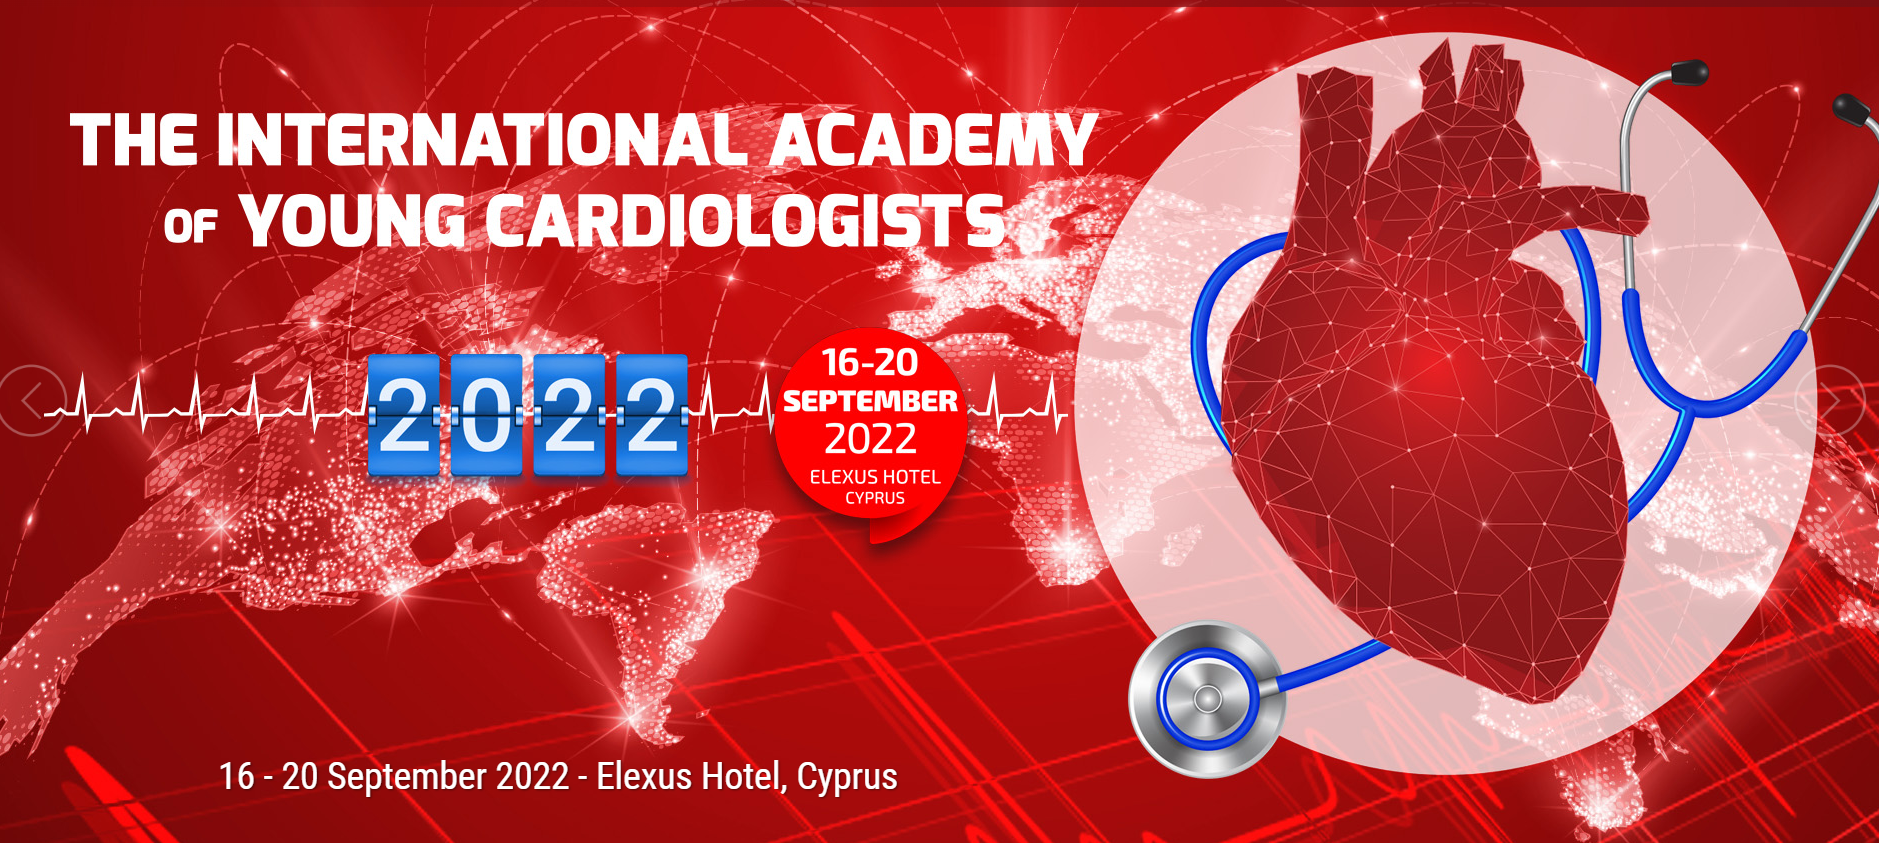 The International Academy of Young Cardiologists 2022